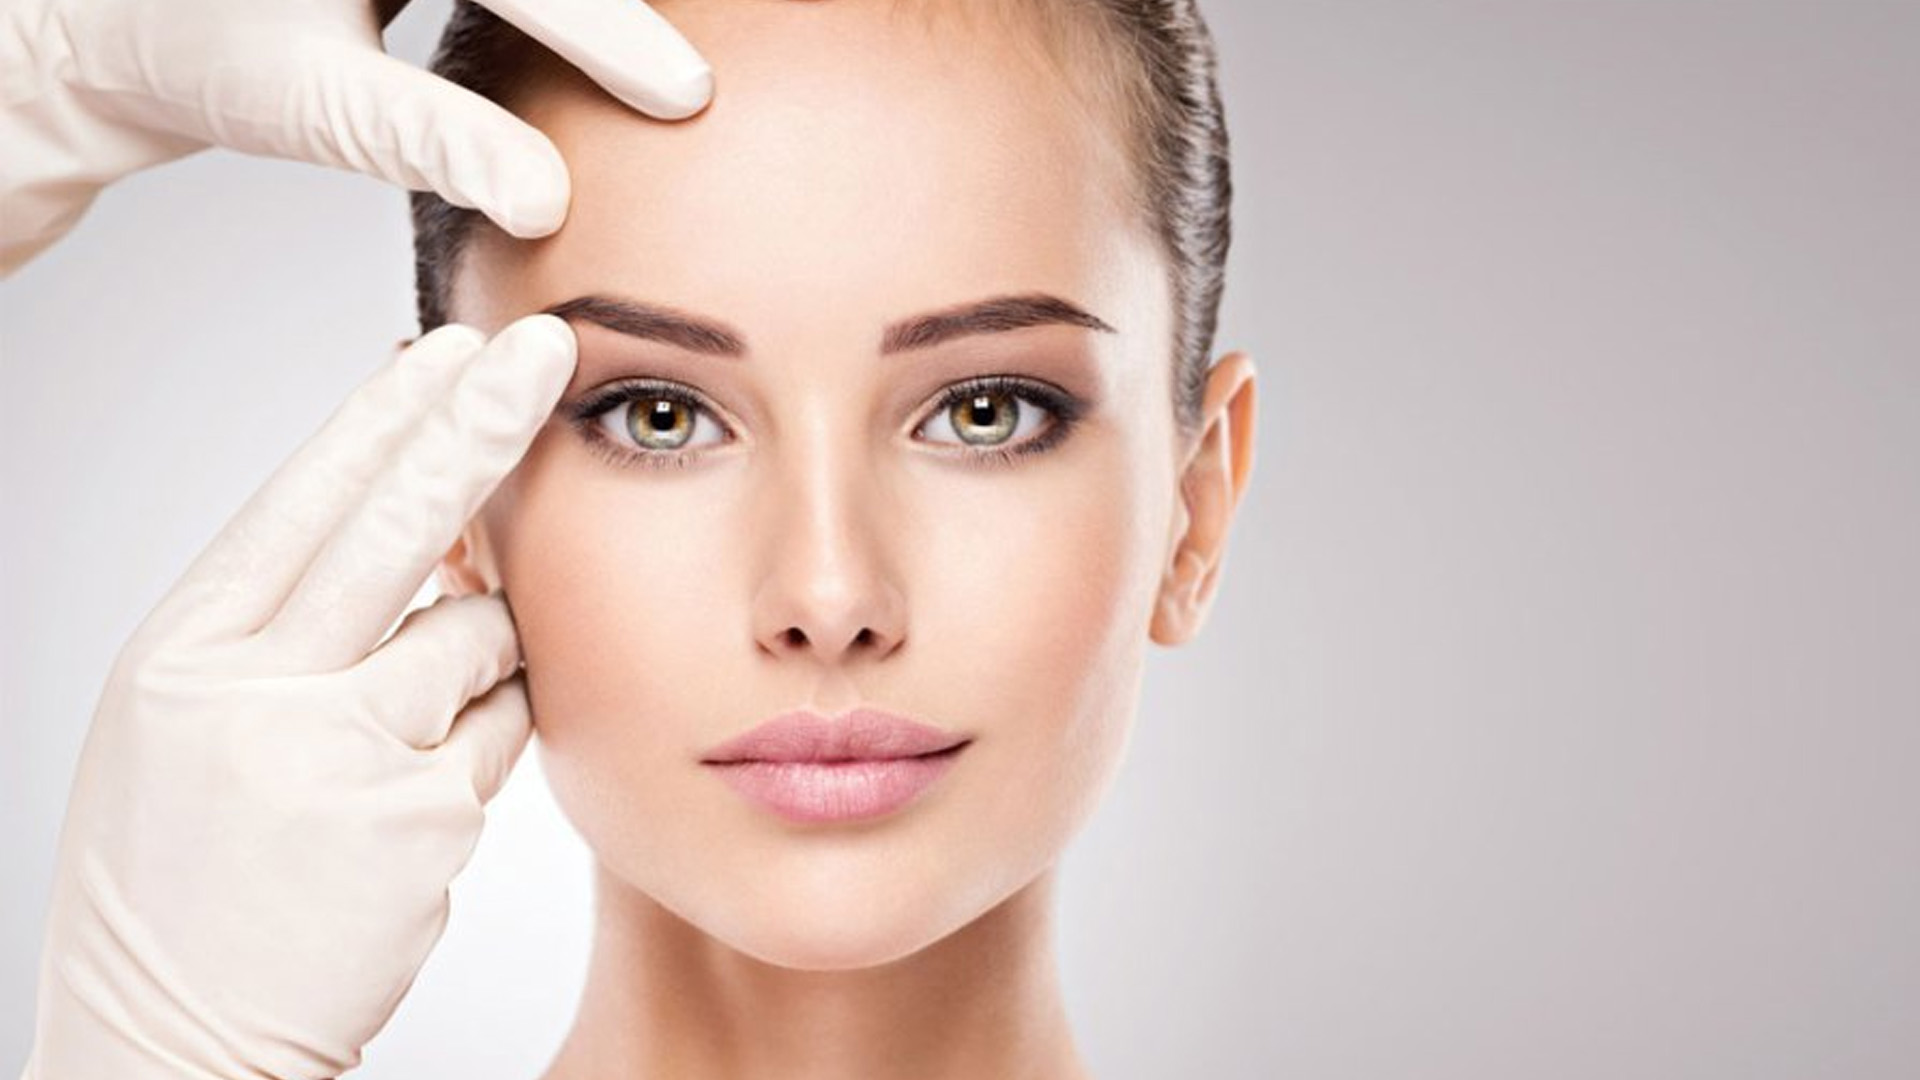 Youthful Eyes: Exploring Eyebrow and Forehead Lift Procedures